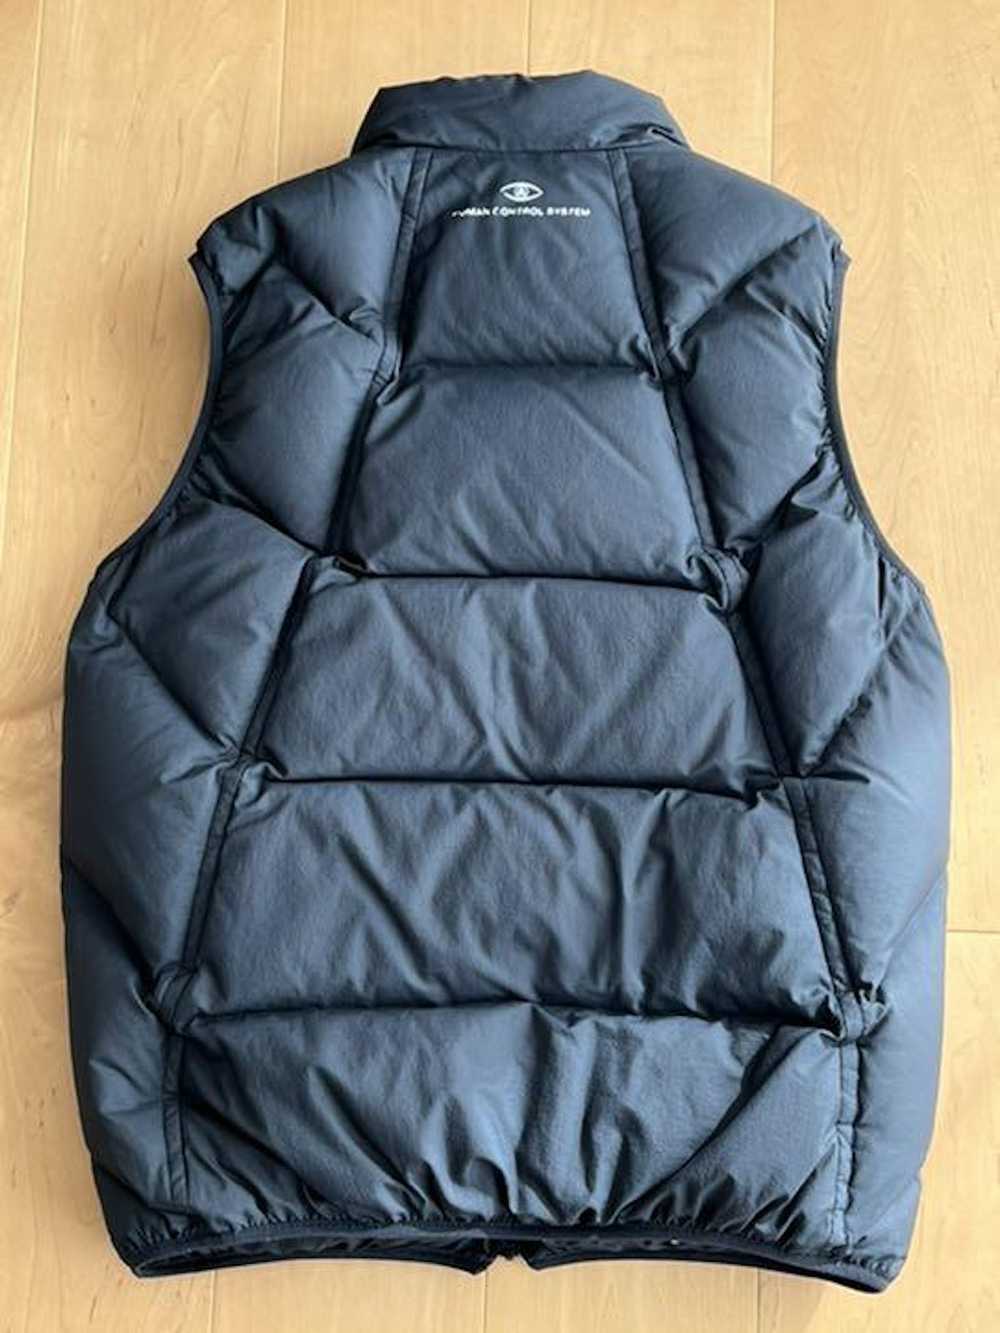 Undercover AW17 "HUMAN CONTROL SYSTEM" Down Vest - image 2